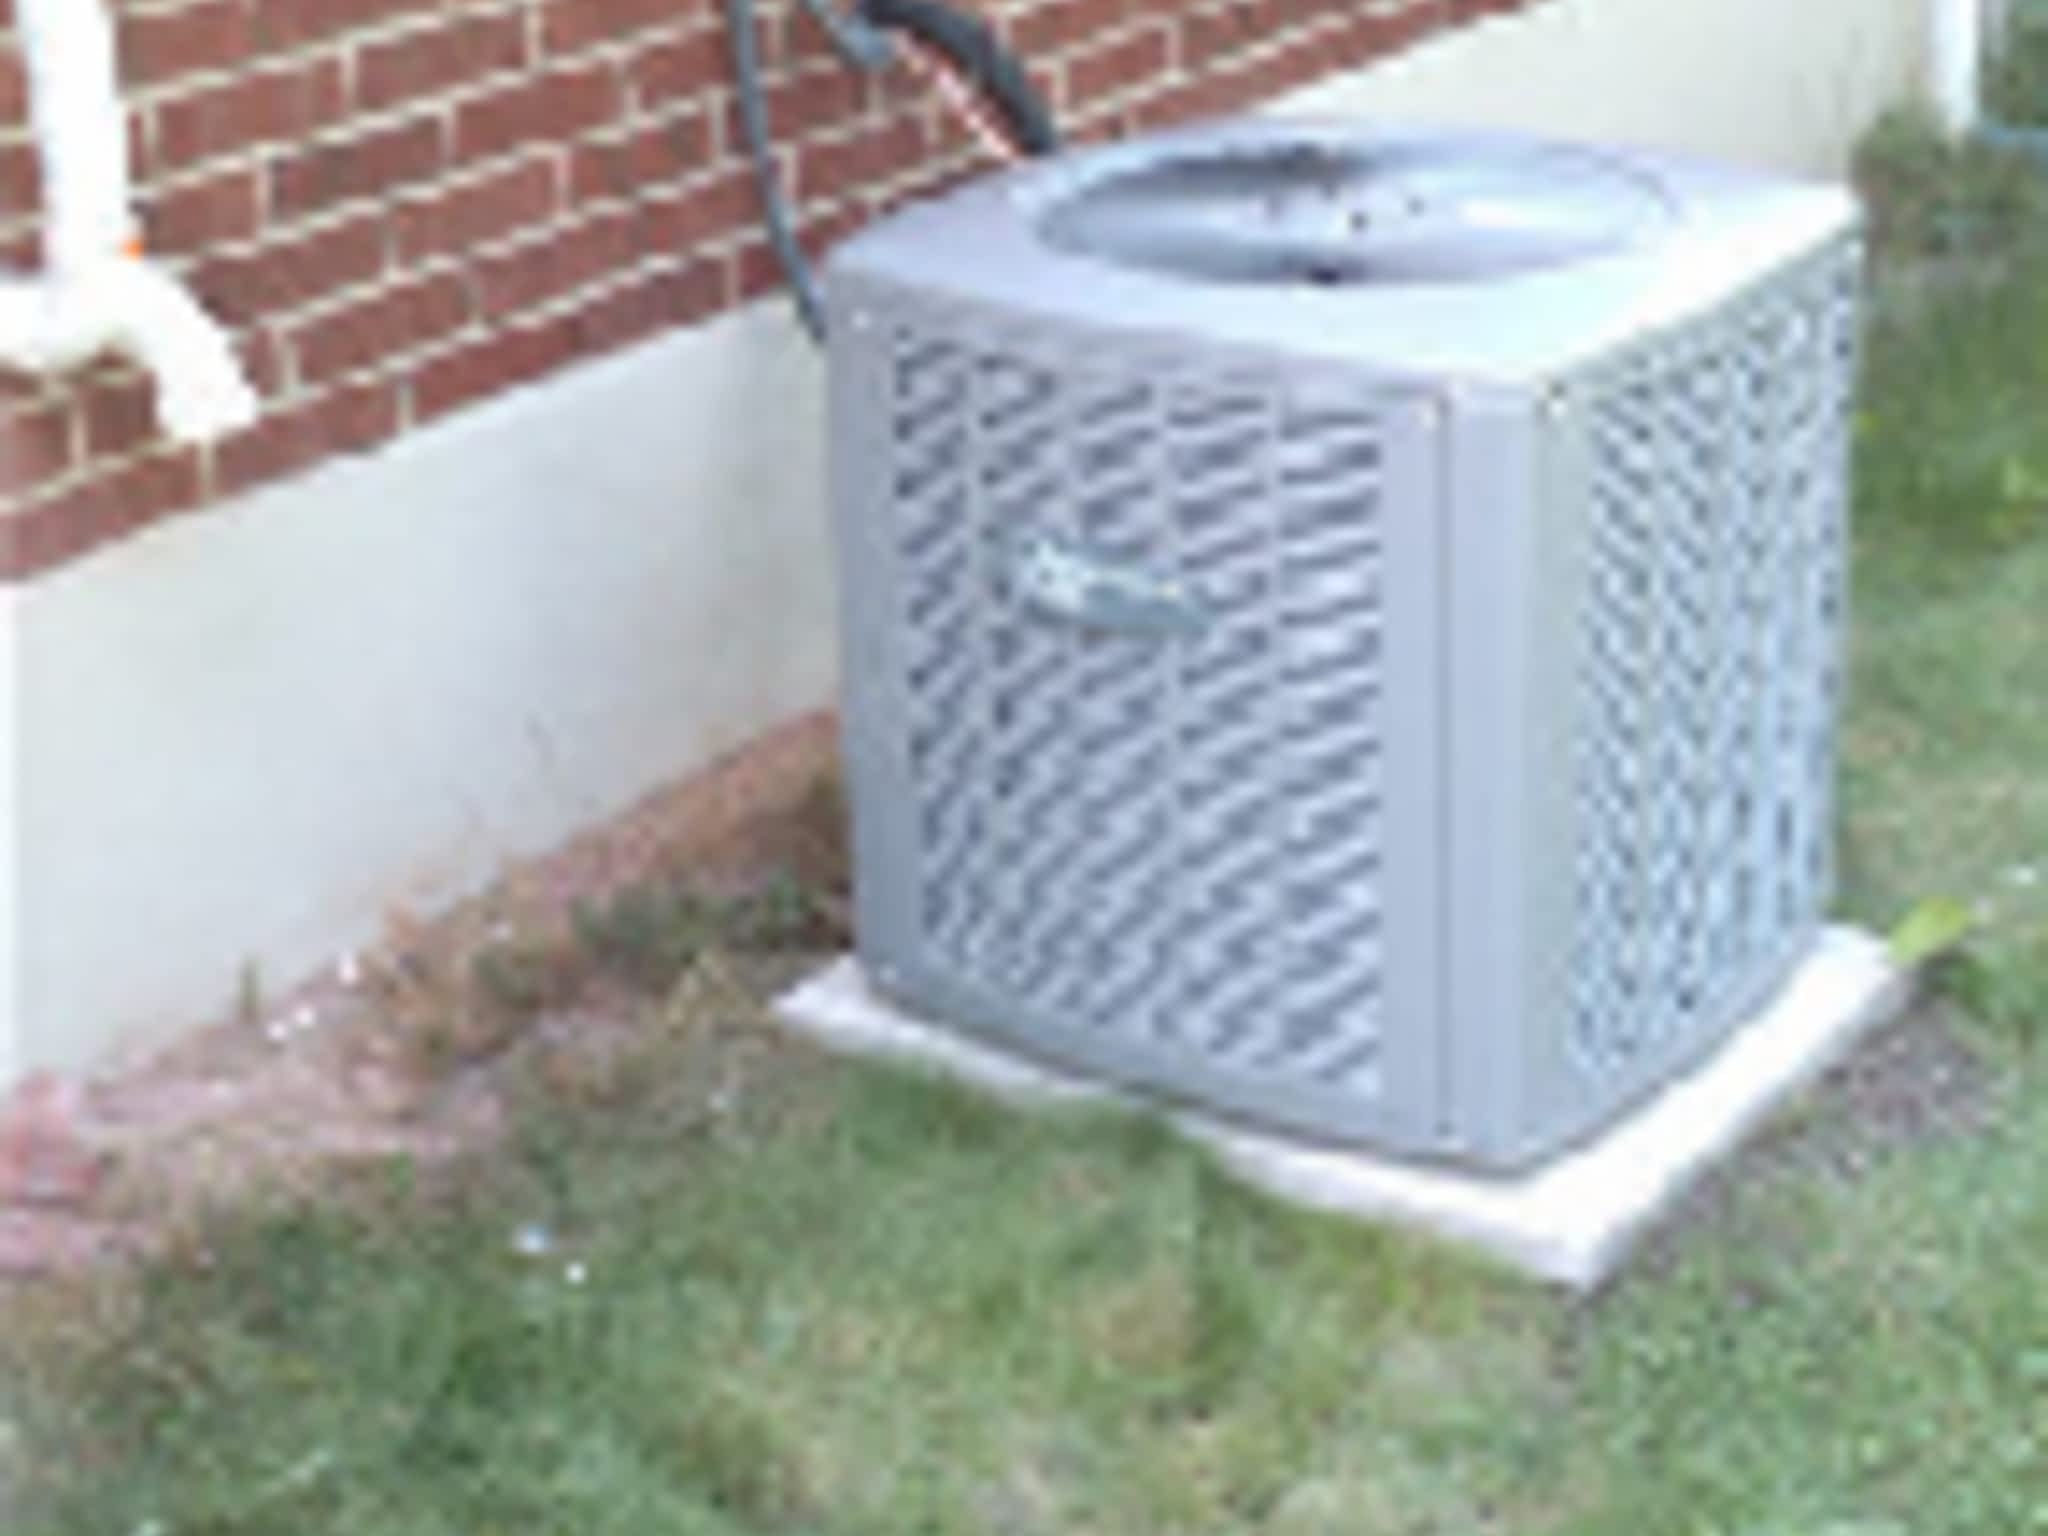 photo G & J Heating and Cooling